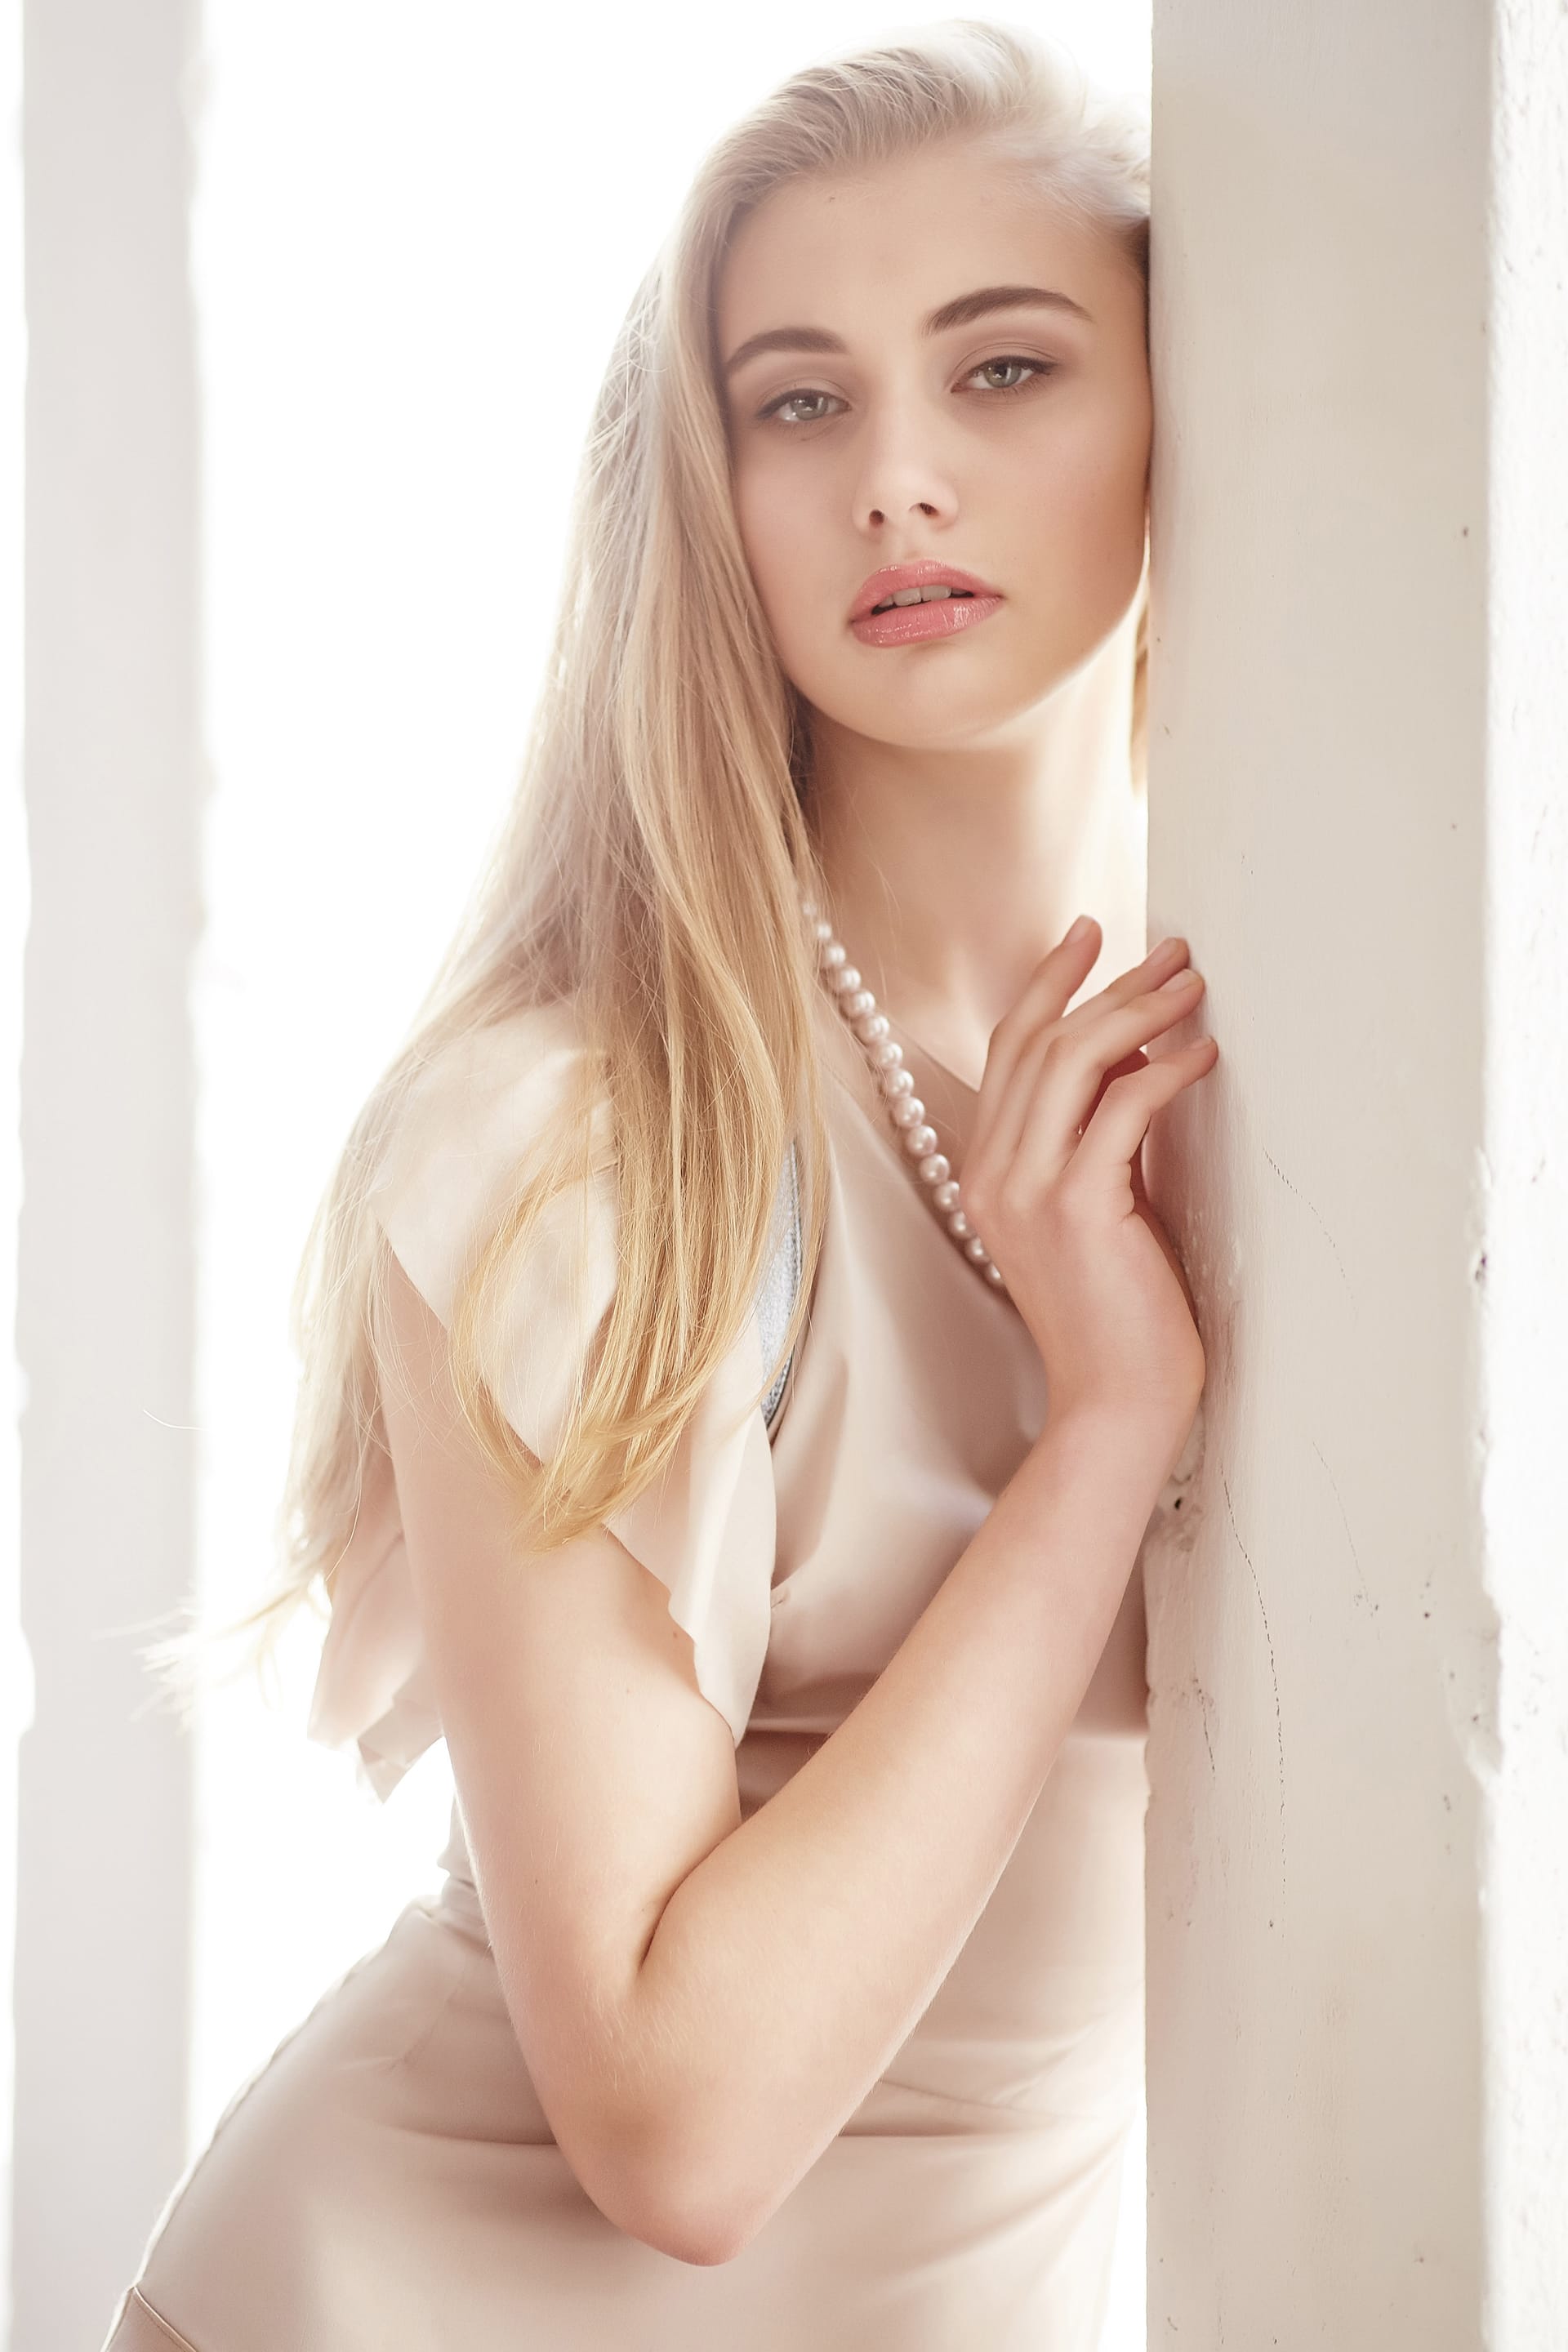 Slim female with long blond hair red lips